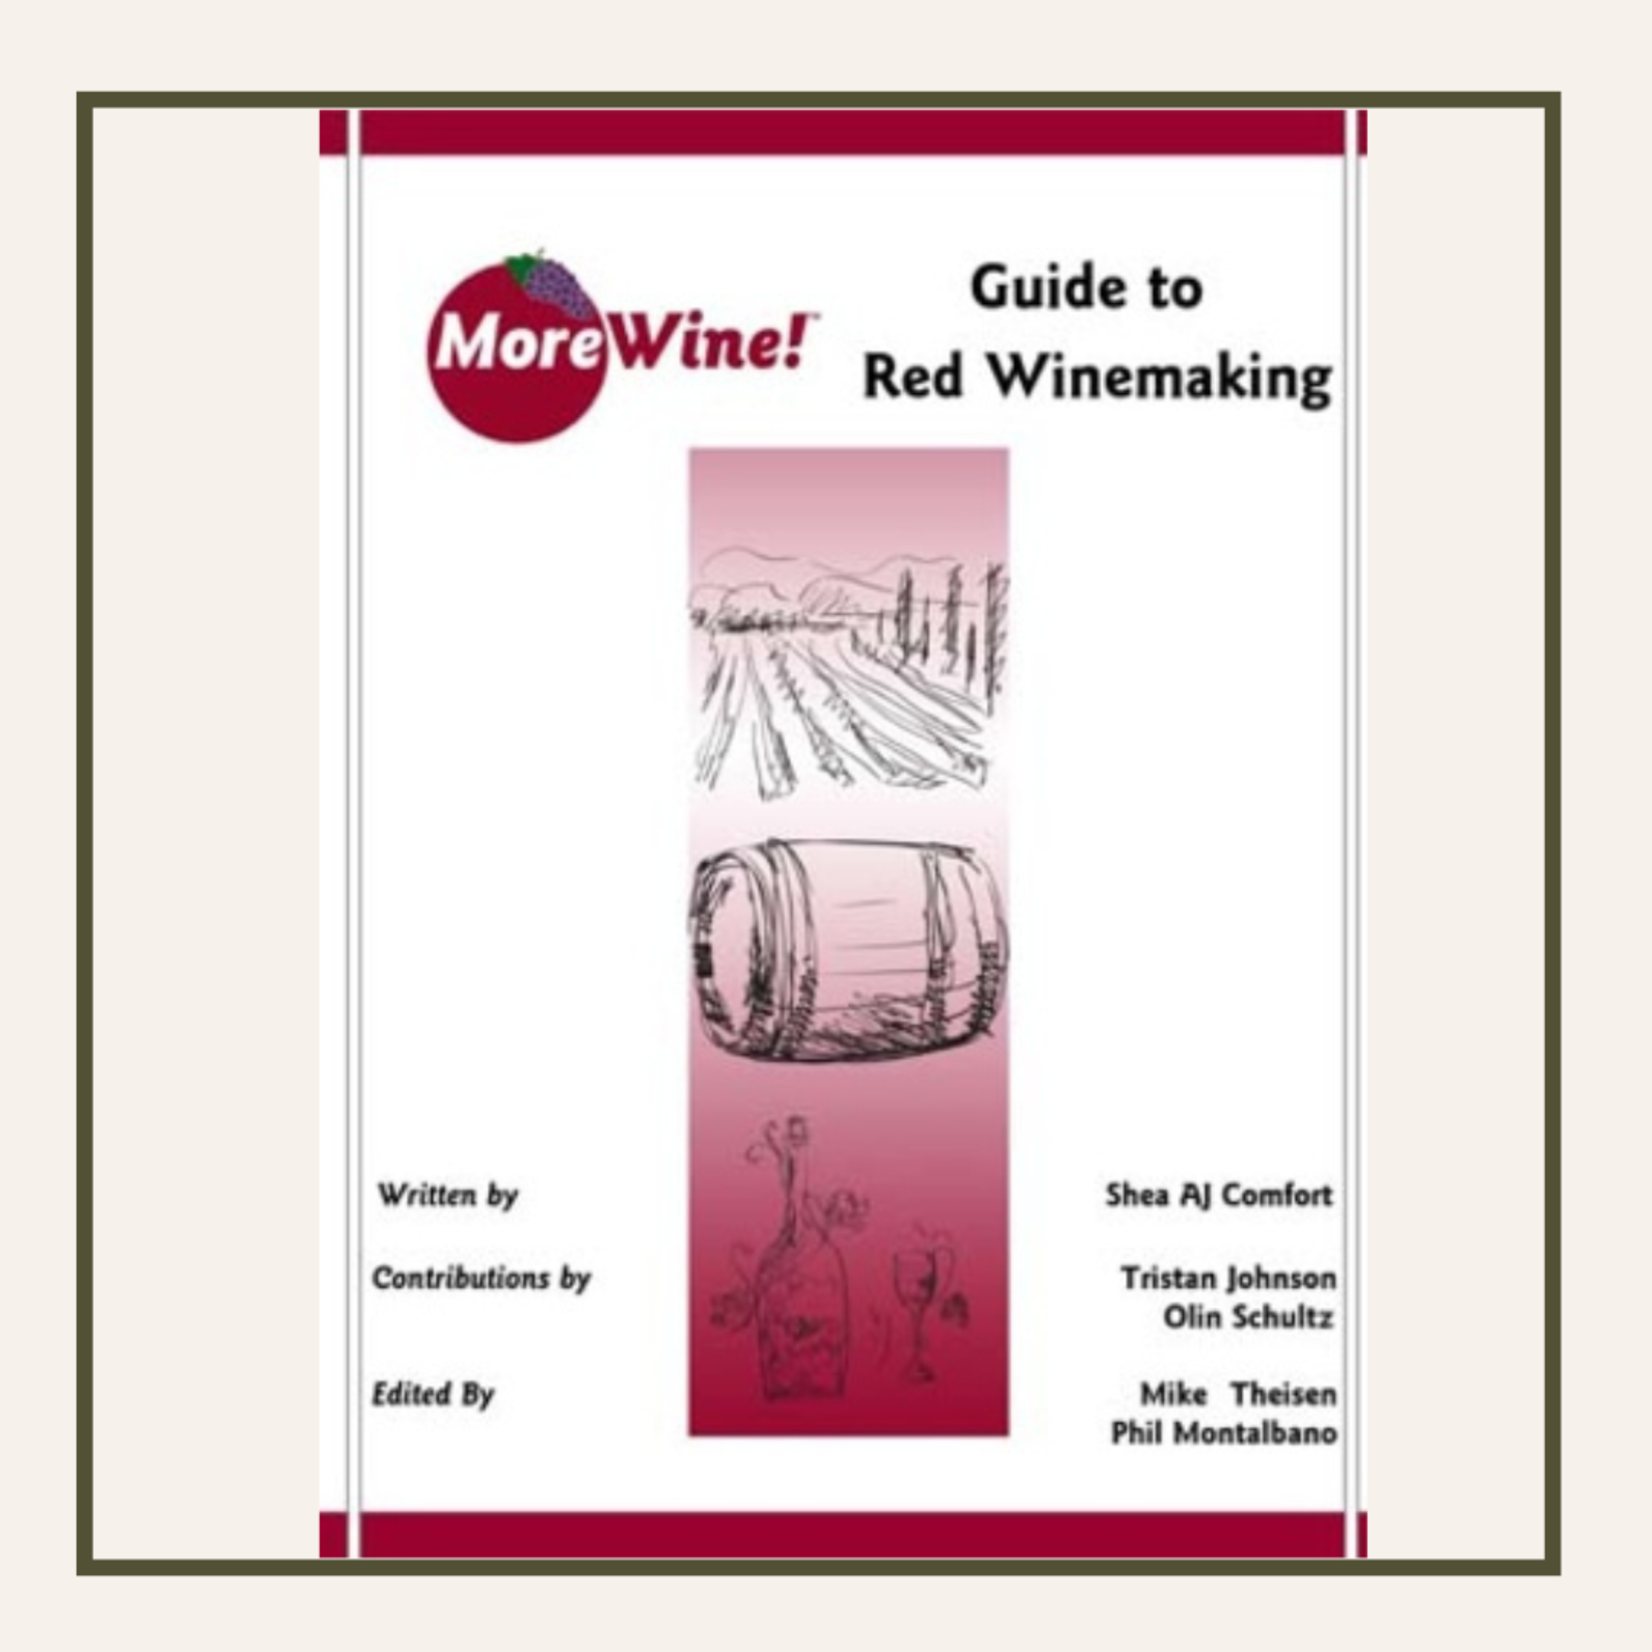 MoreWine!® Guide to Red Winemaking